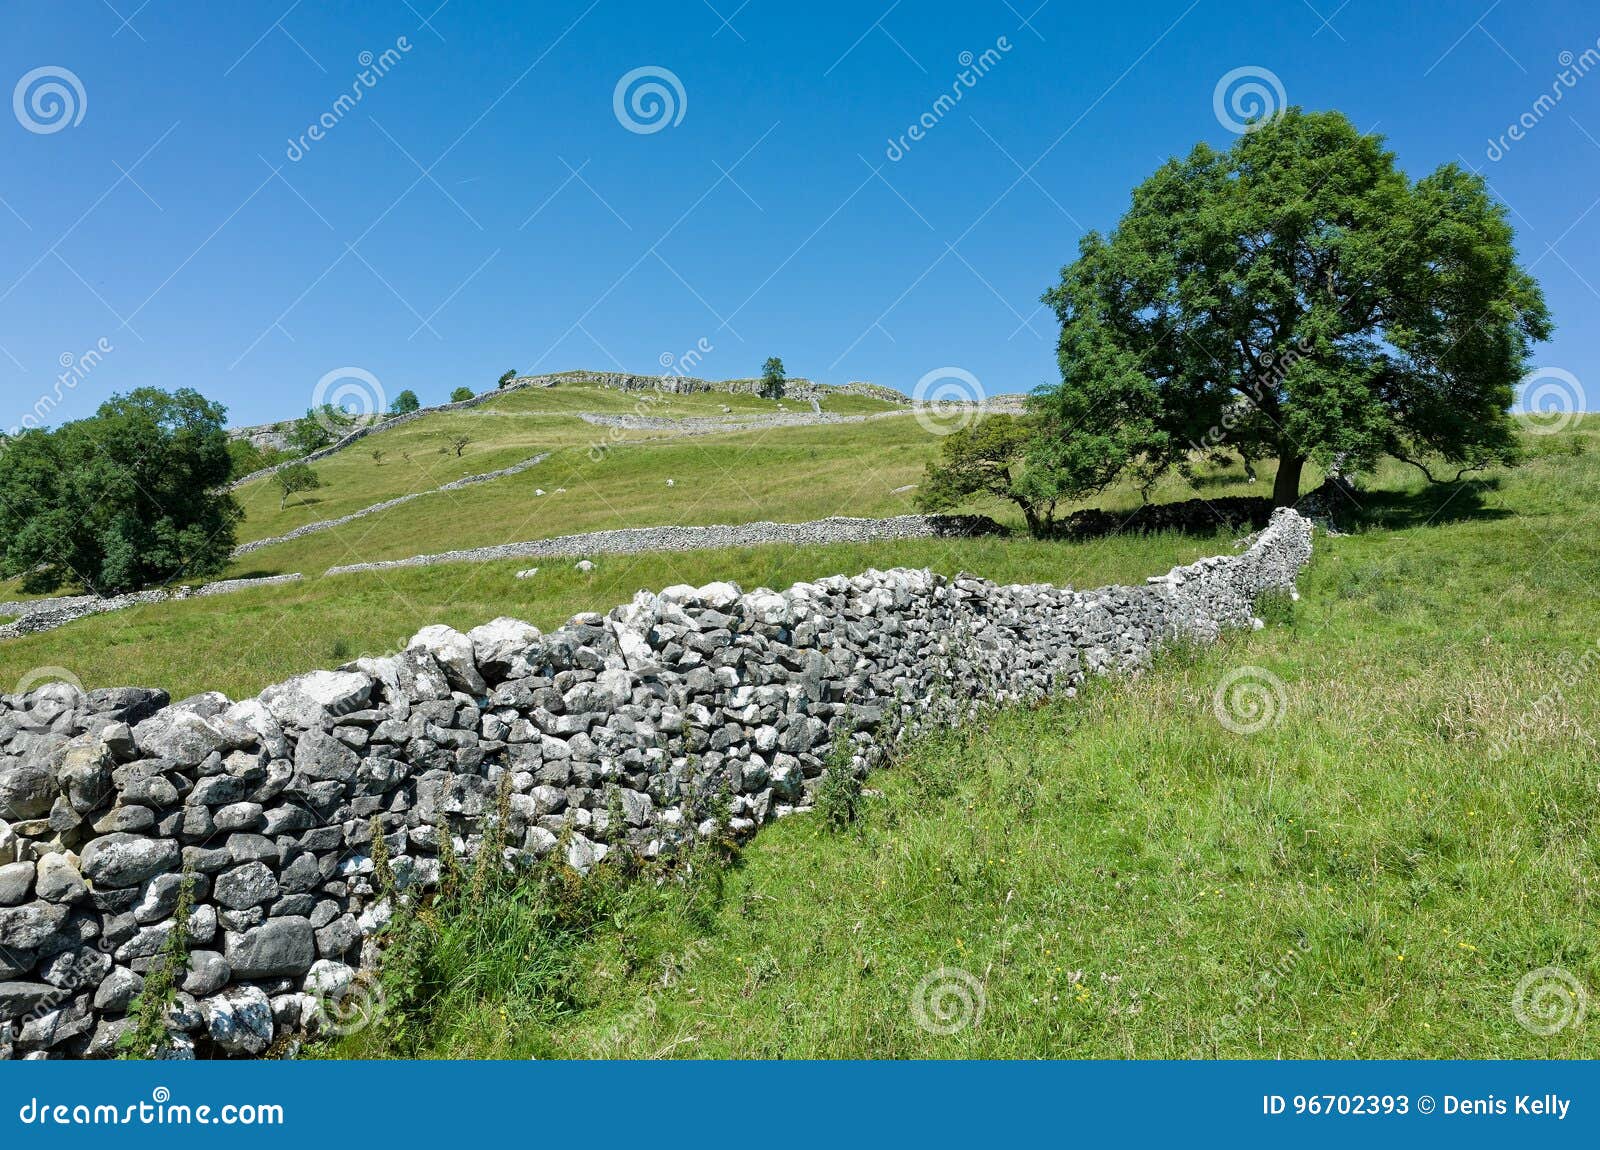 dry stone walls - yorkshire dales, england